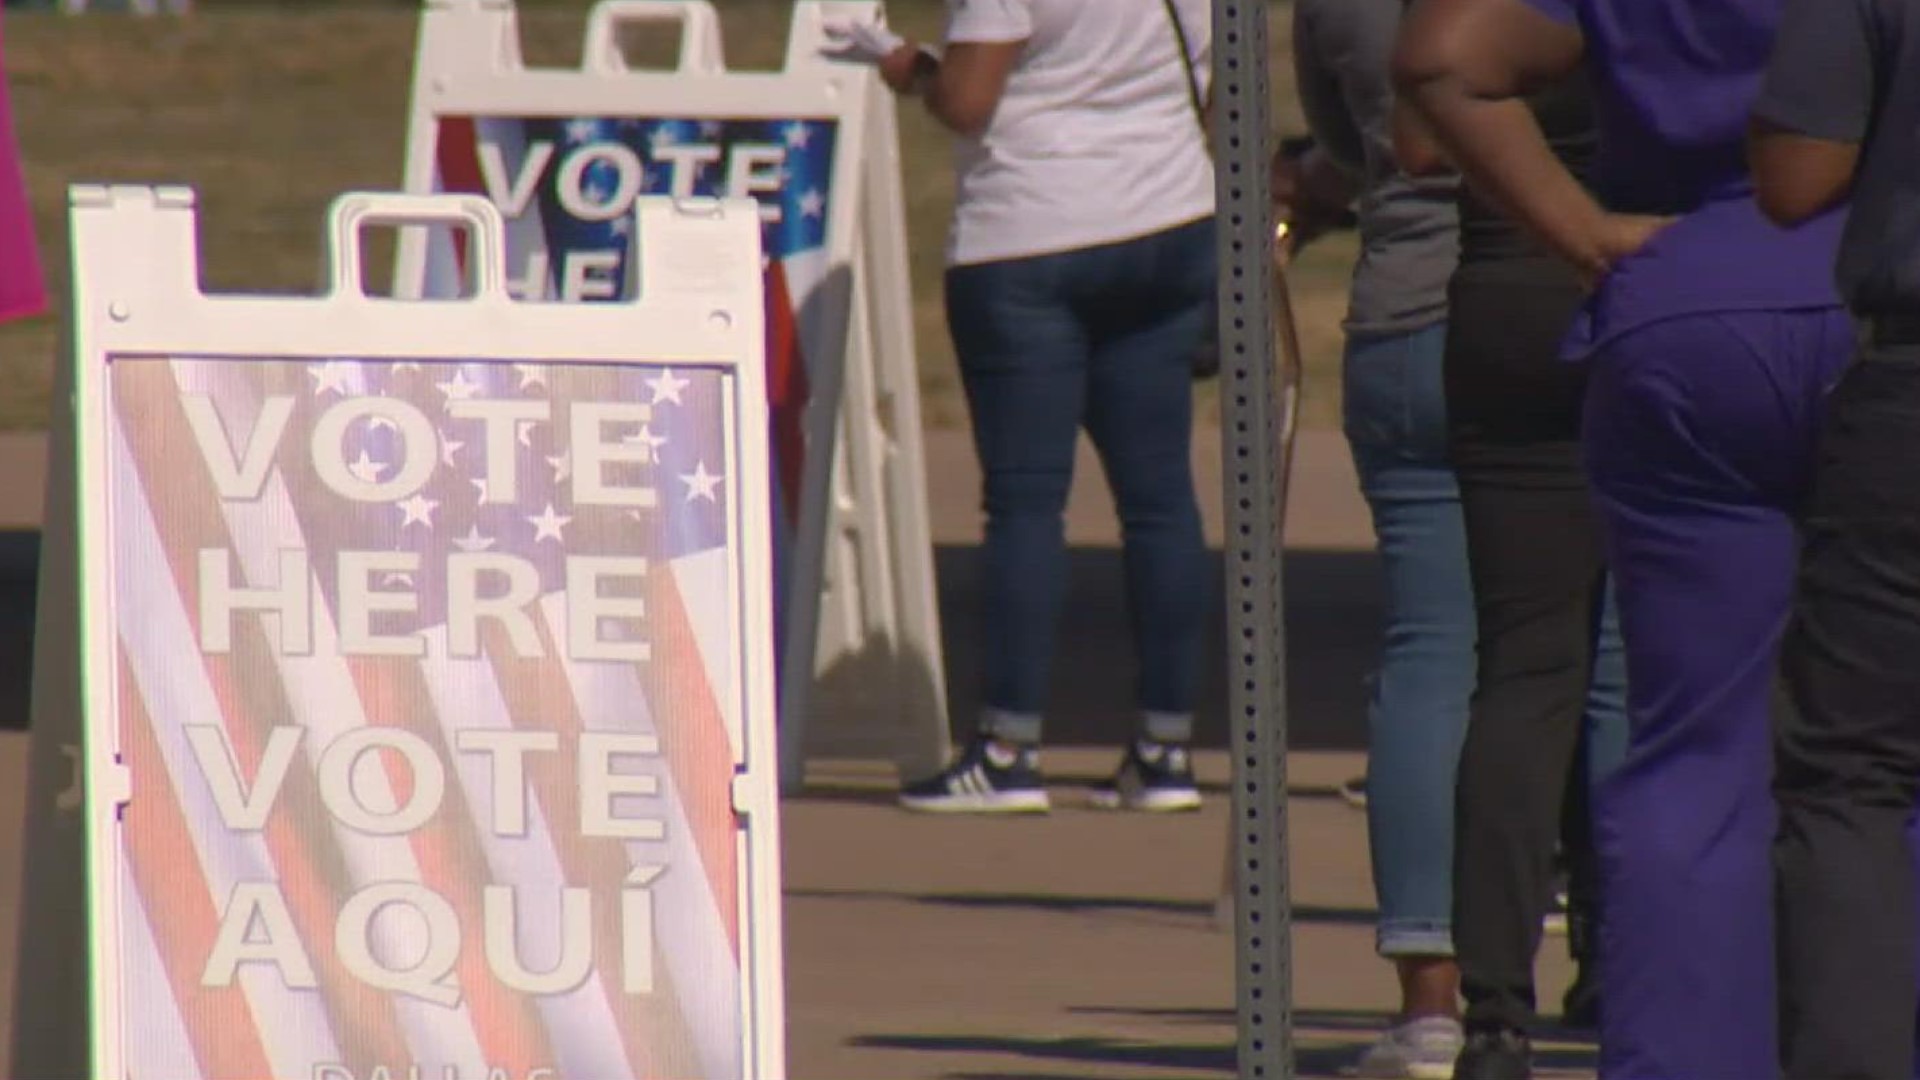 The proposed bill could make it harder for students to vote.